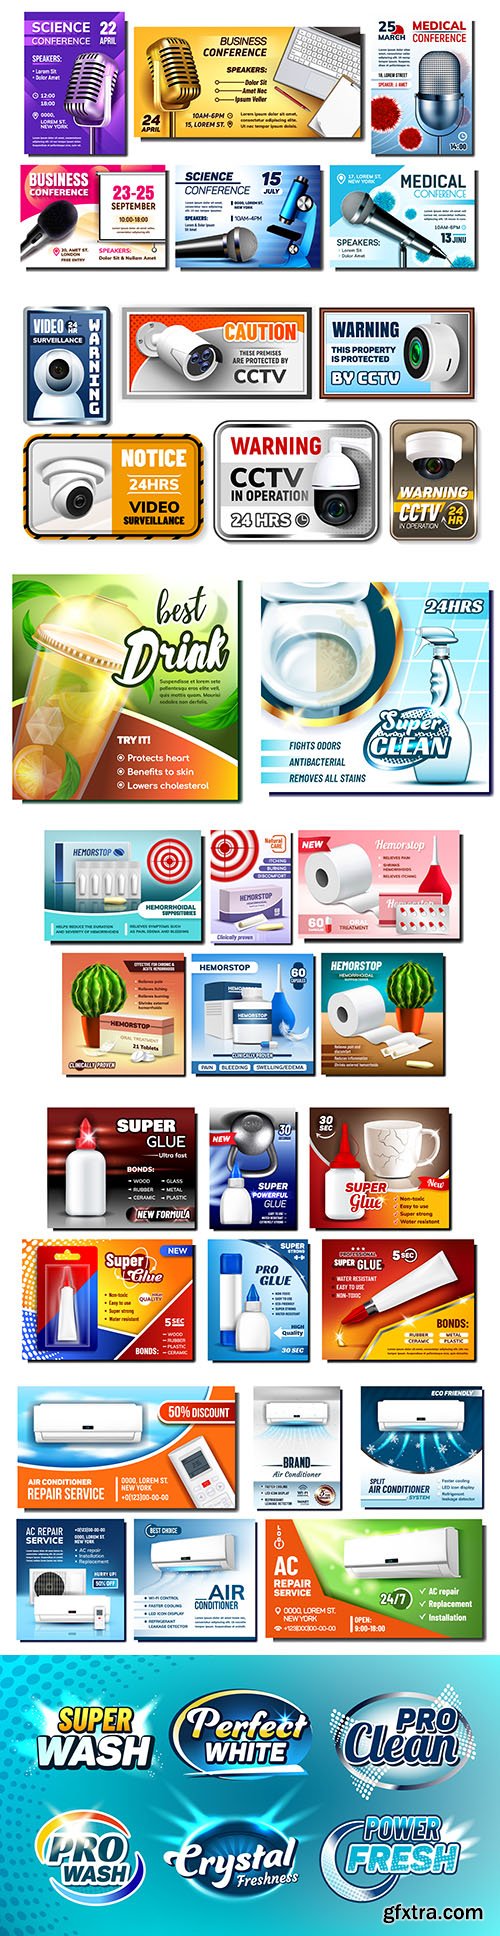 Creative advertising posters and banners to promote trade